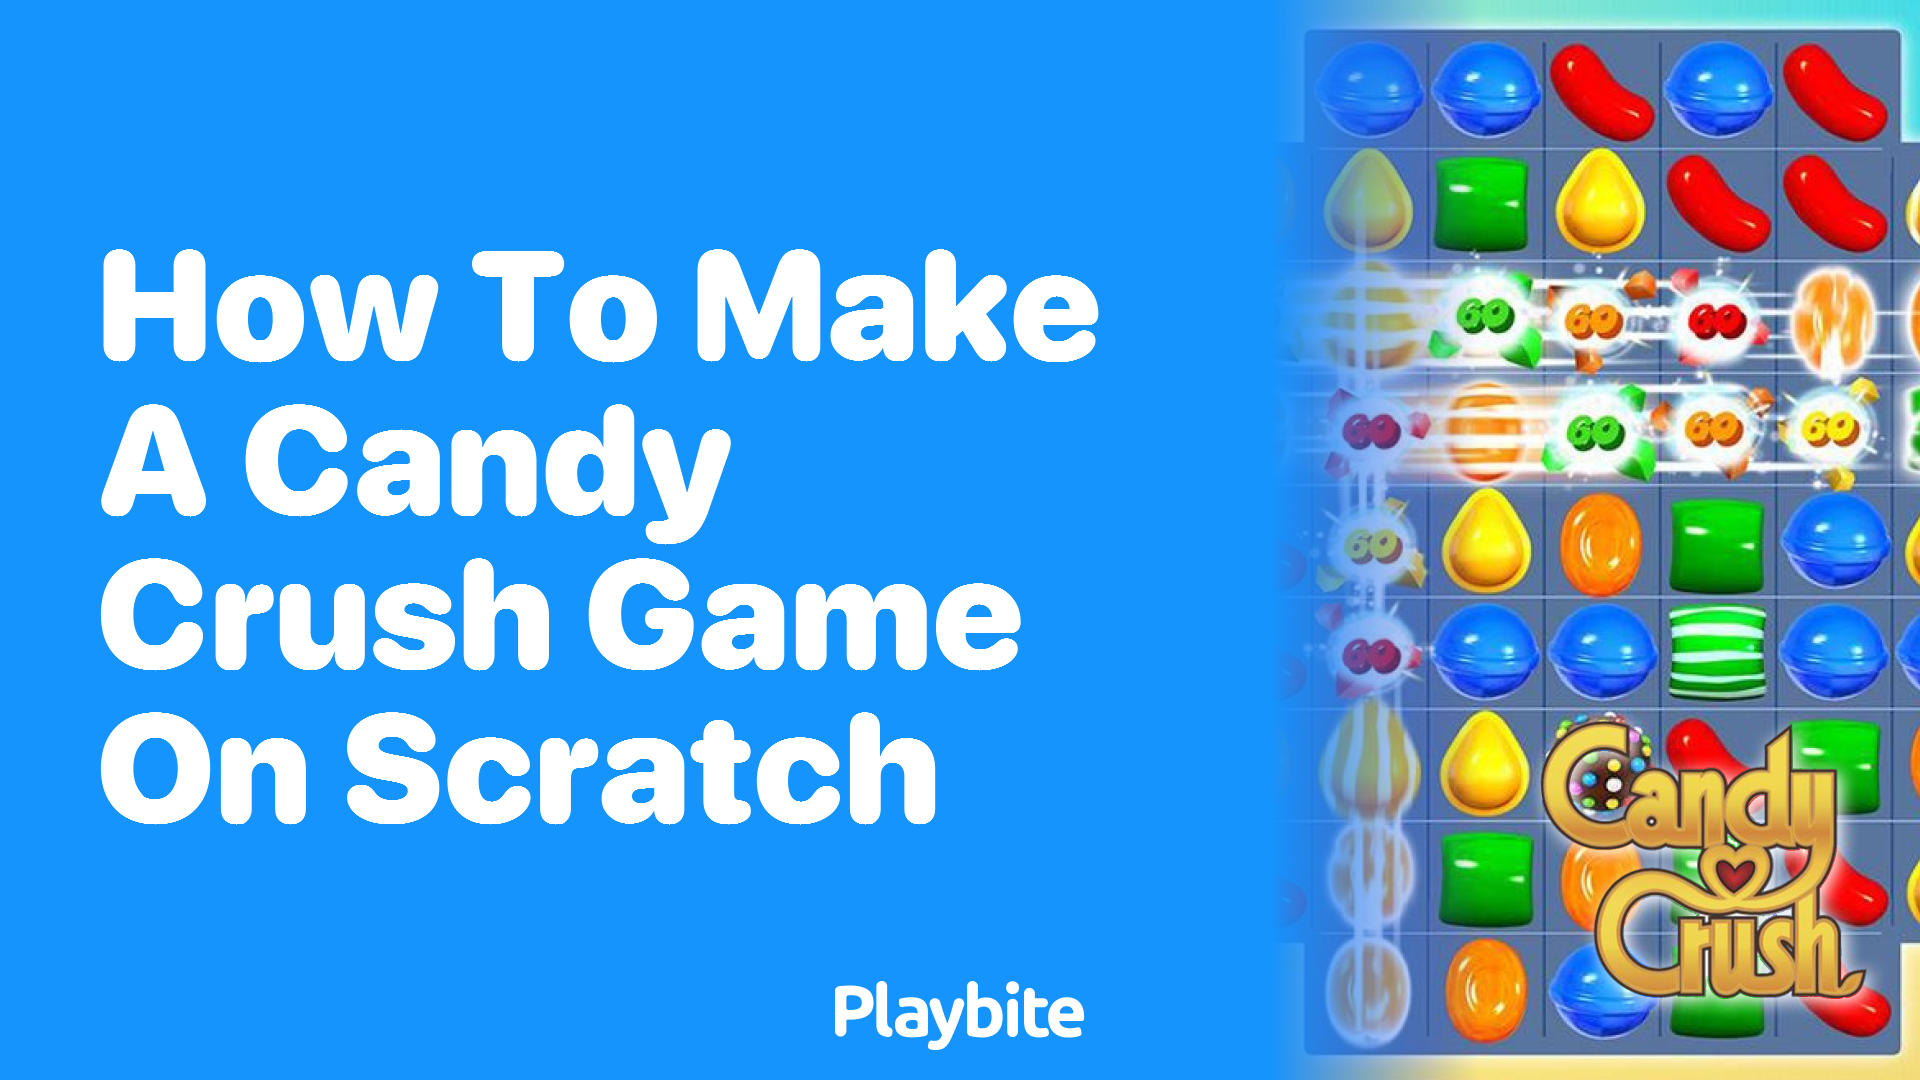 How to Make a Candy Crush Game on Scratch  